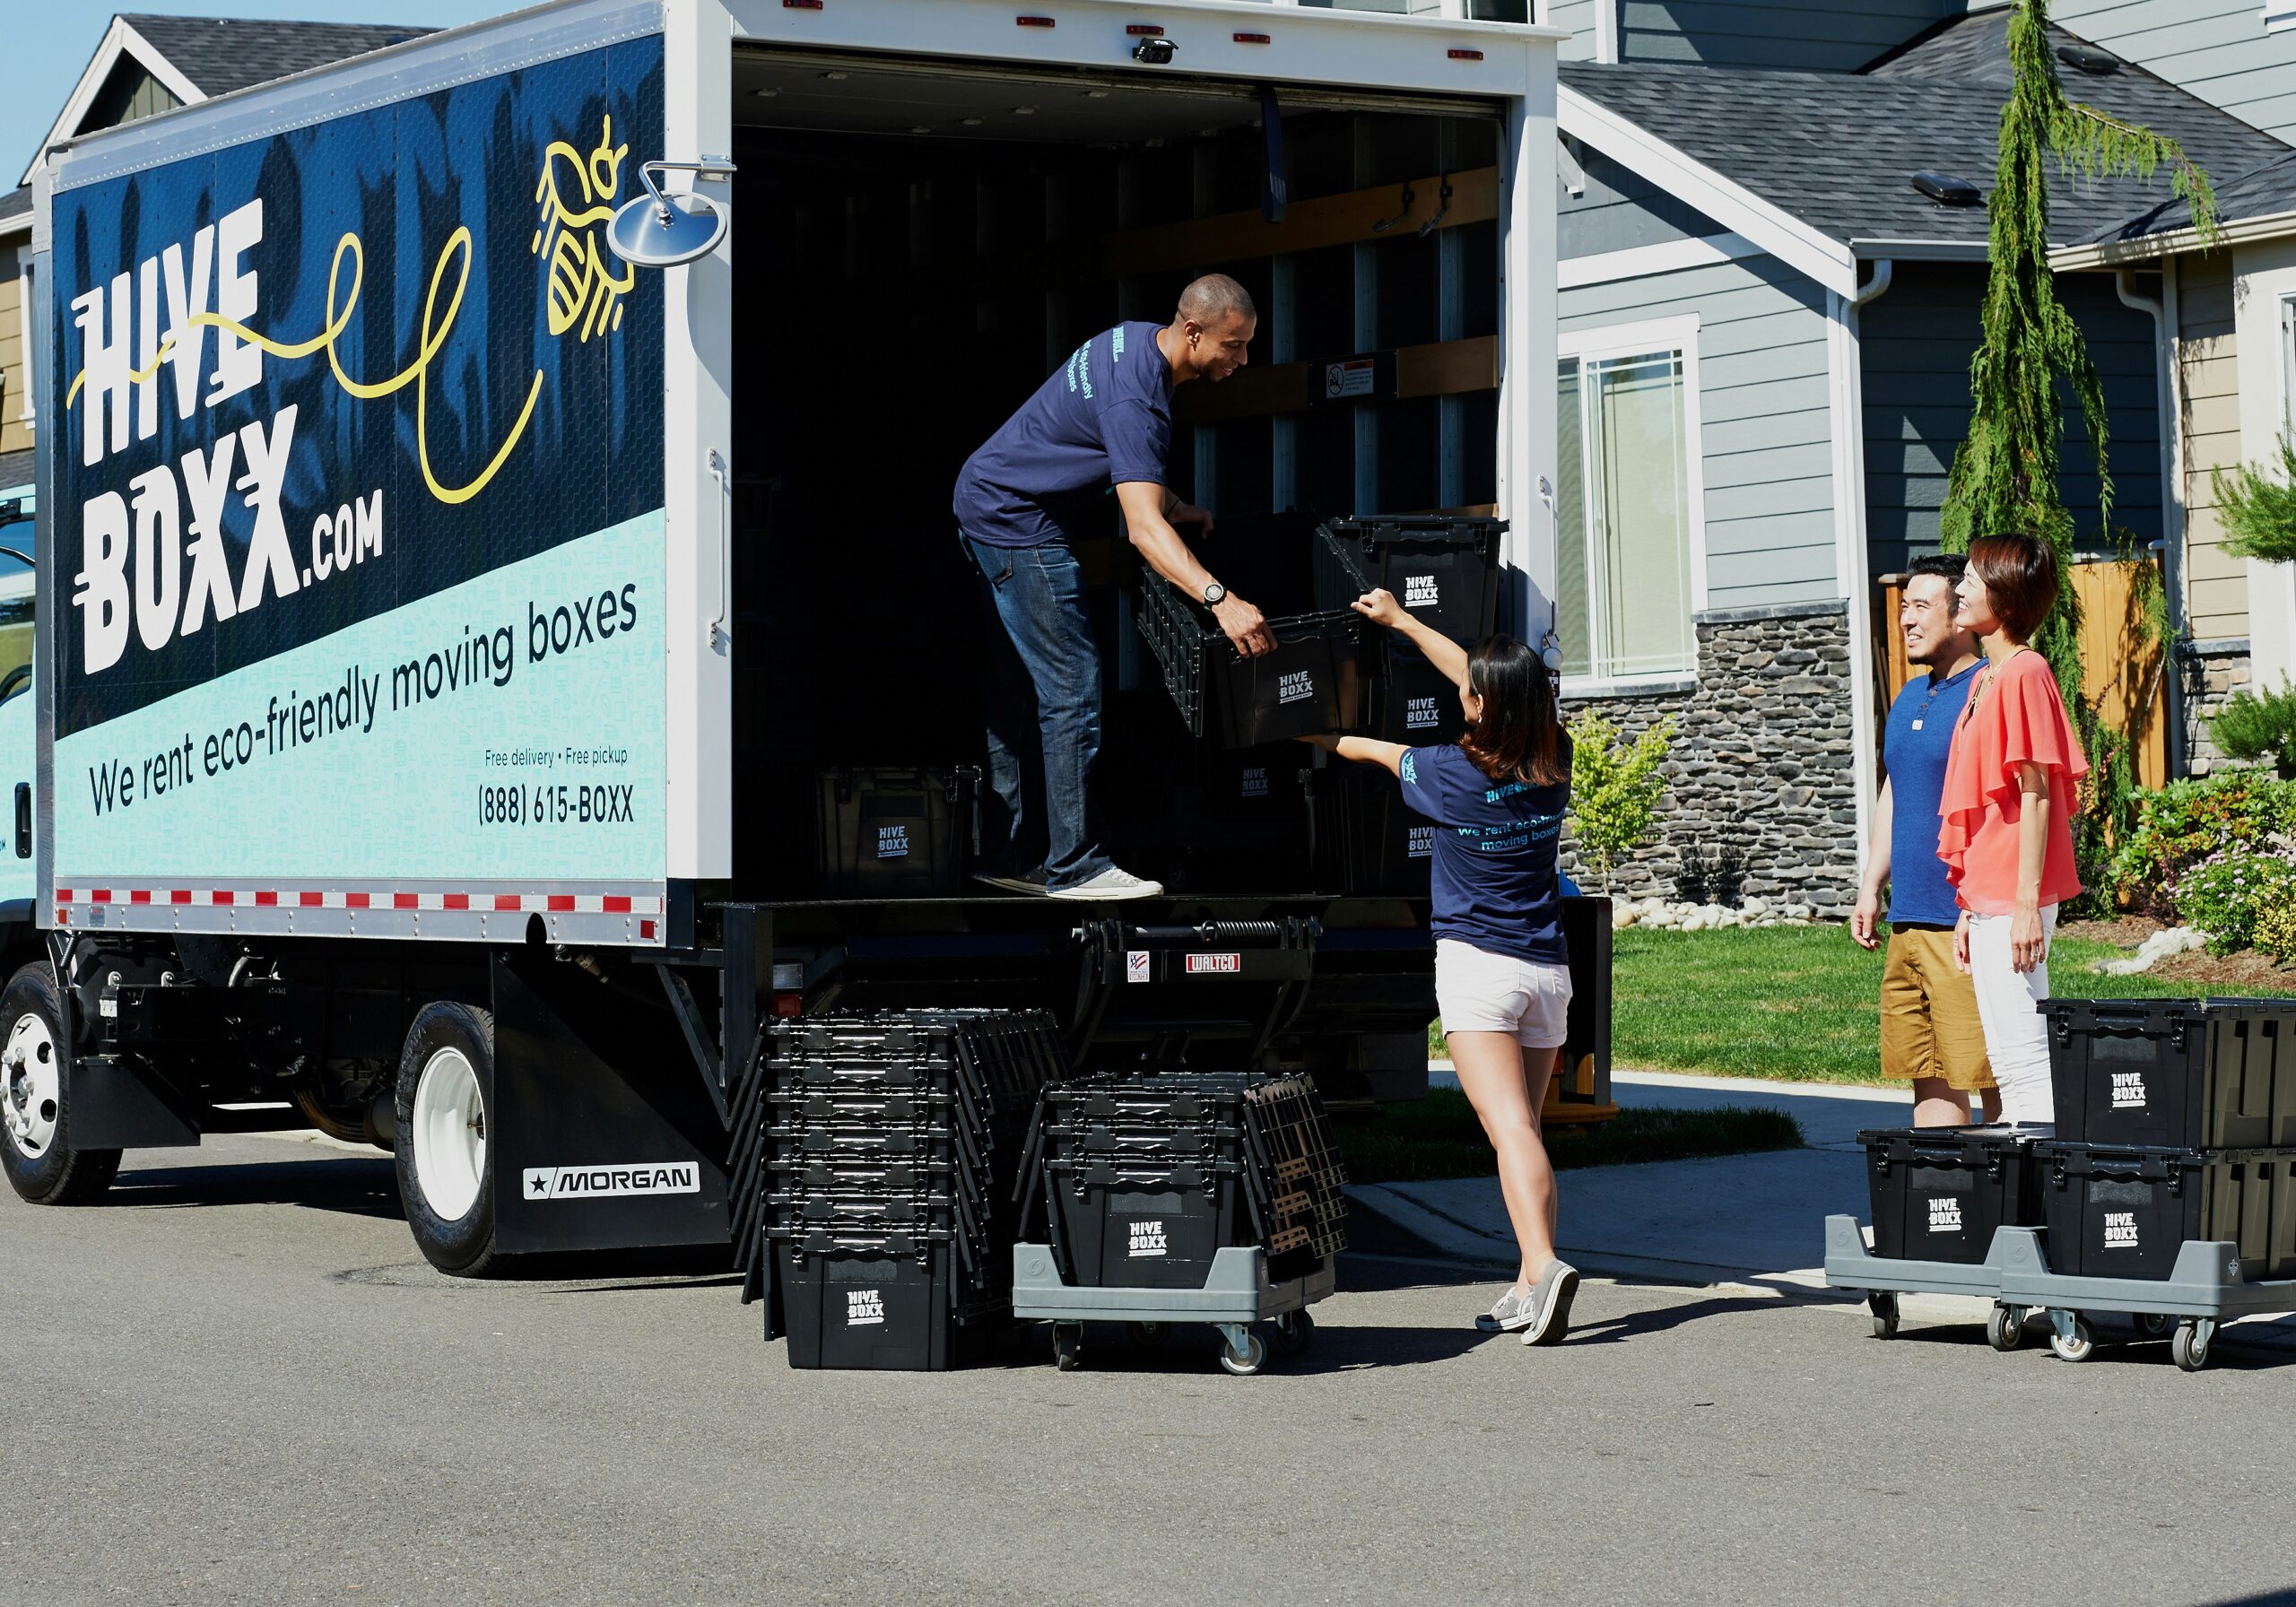 Movers helping relocating homebuyers move homes with a moving truck